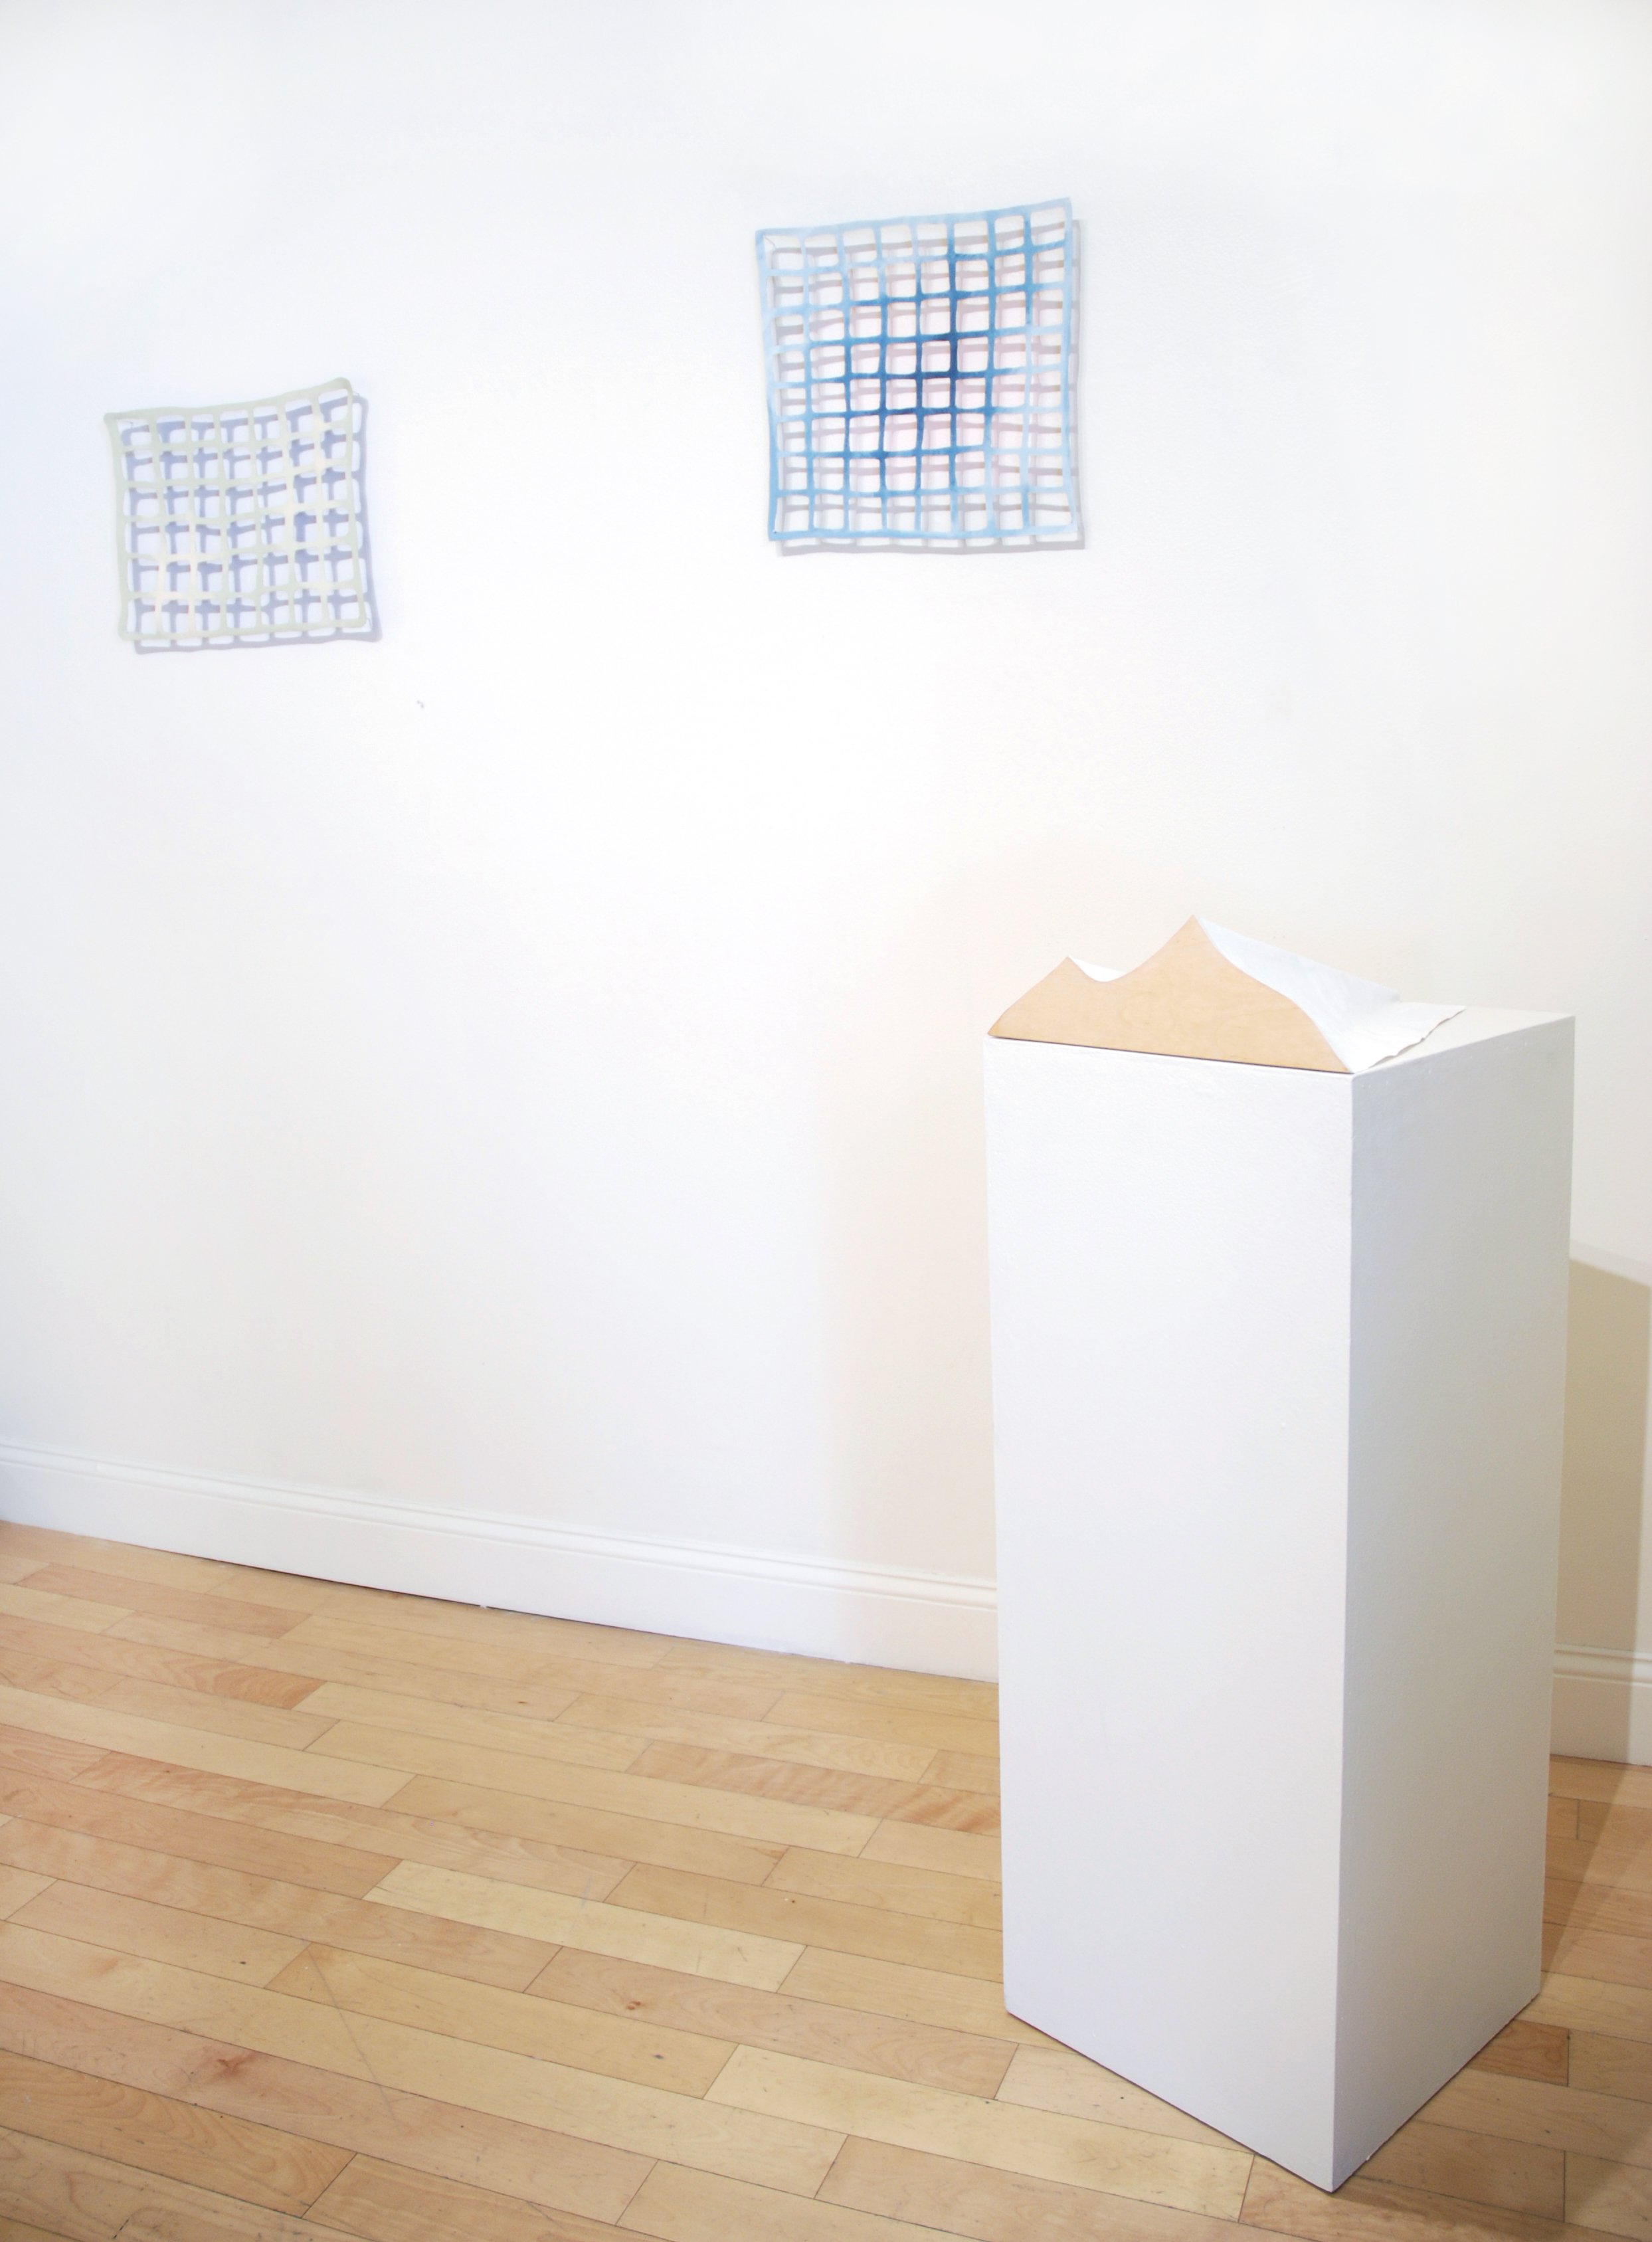 Truth of the Matter, installation view